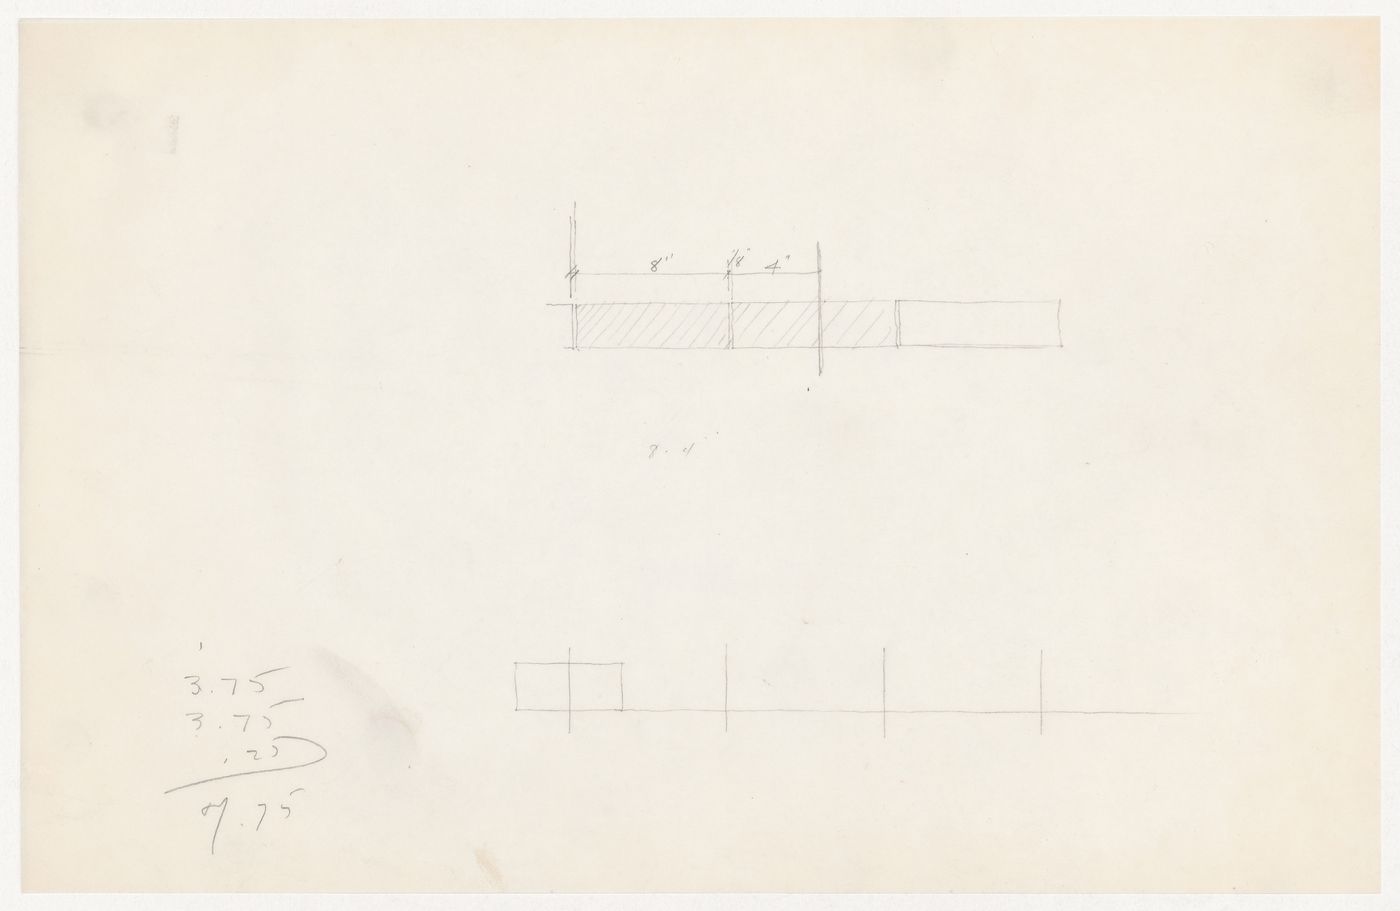 Partial sketch elevations for brick coursing for the Metallurgy Building, Illinois Institute of Technology, Chicago